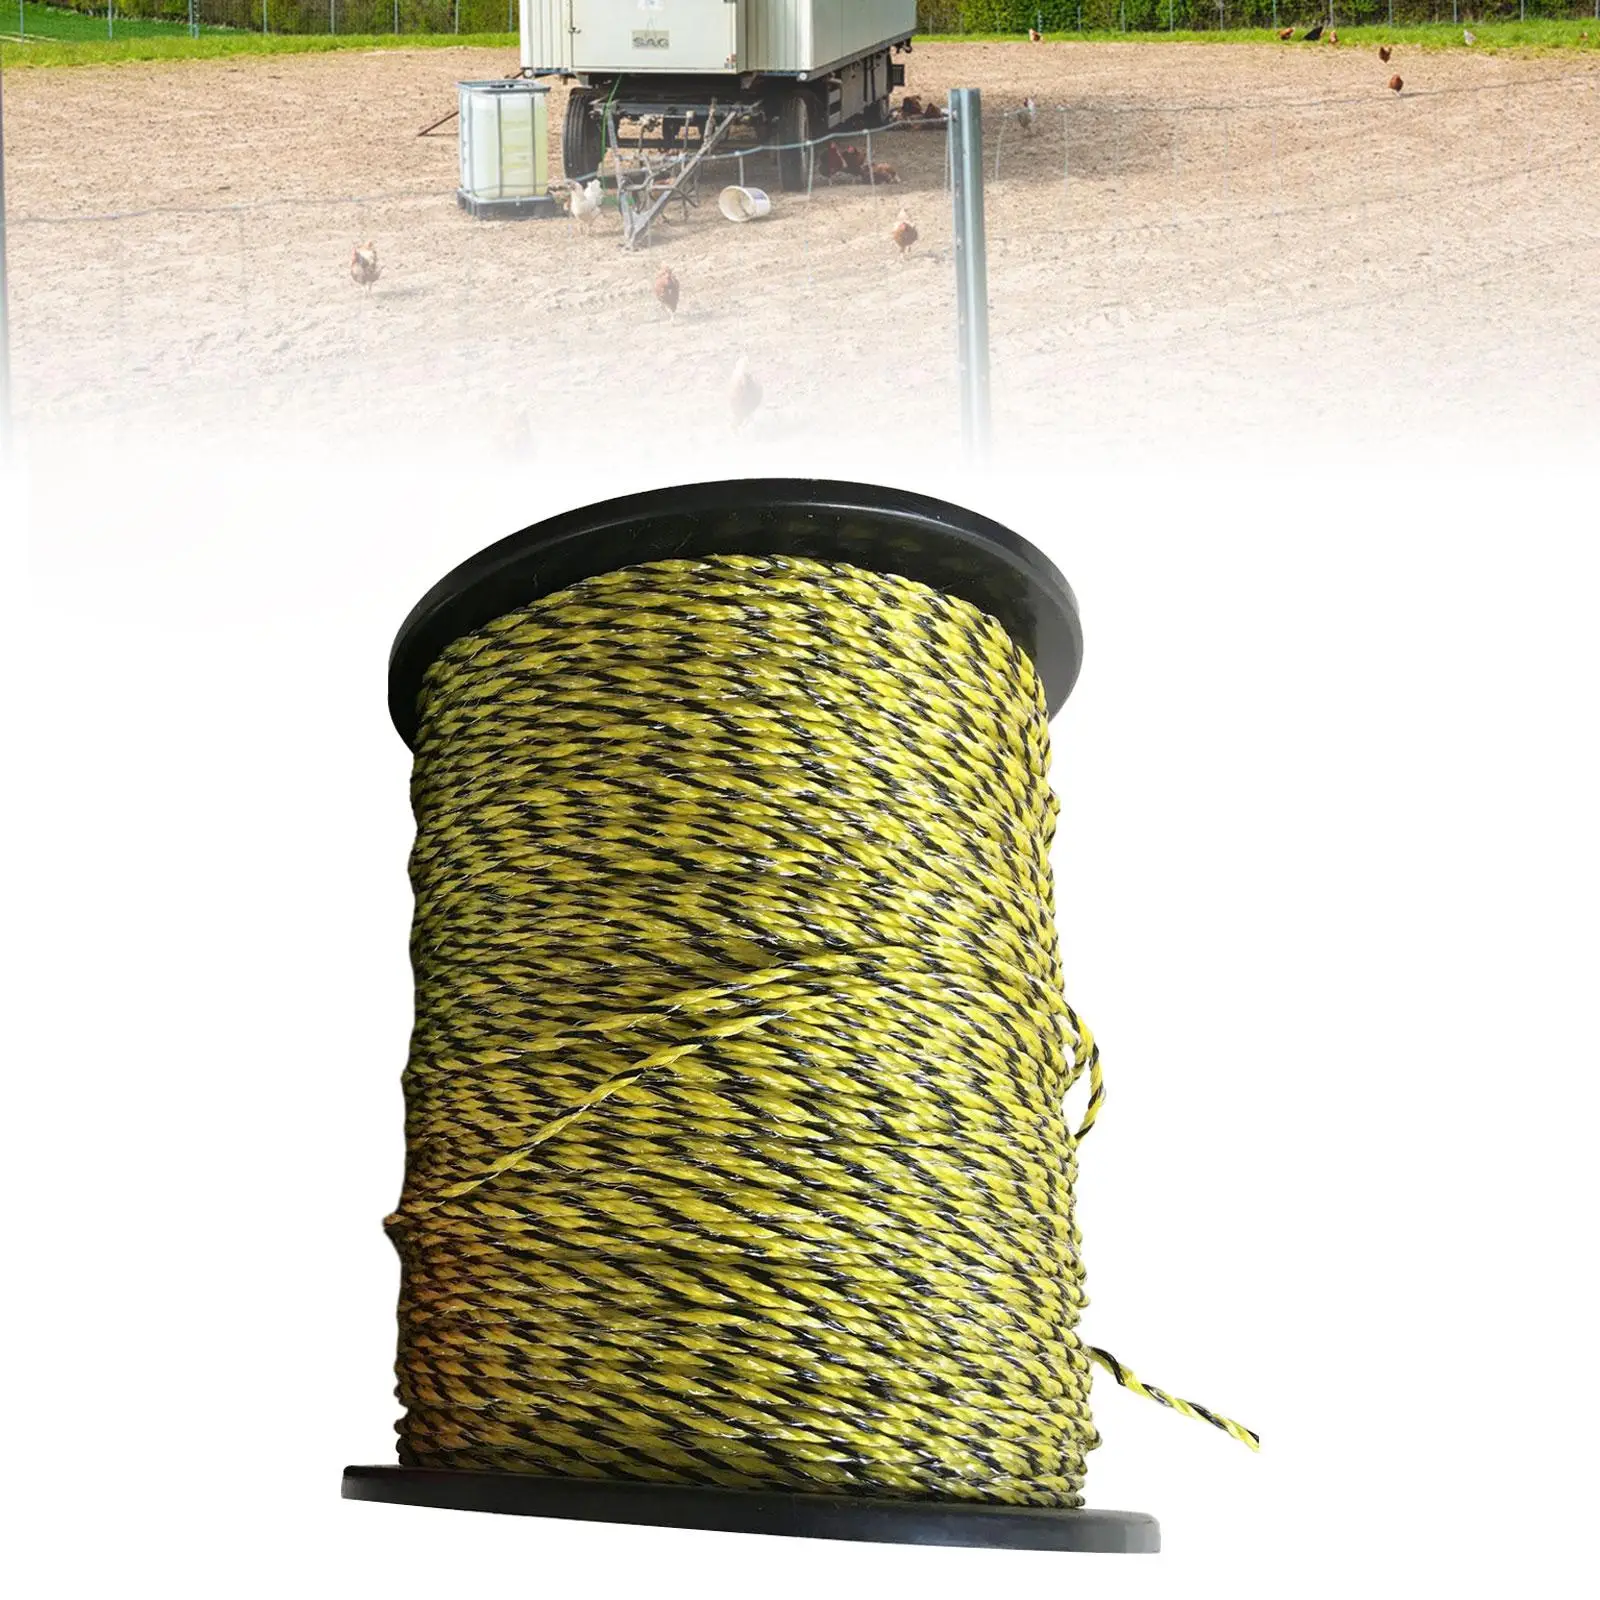 Fence Polywire 400M Reliable Conductivity Animal Rustproof Sheep Horse Cattle for Electric Fencing Polyrope Electric Fence Rope